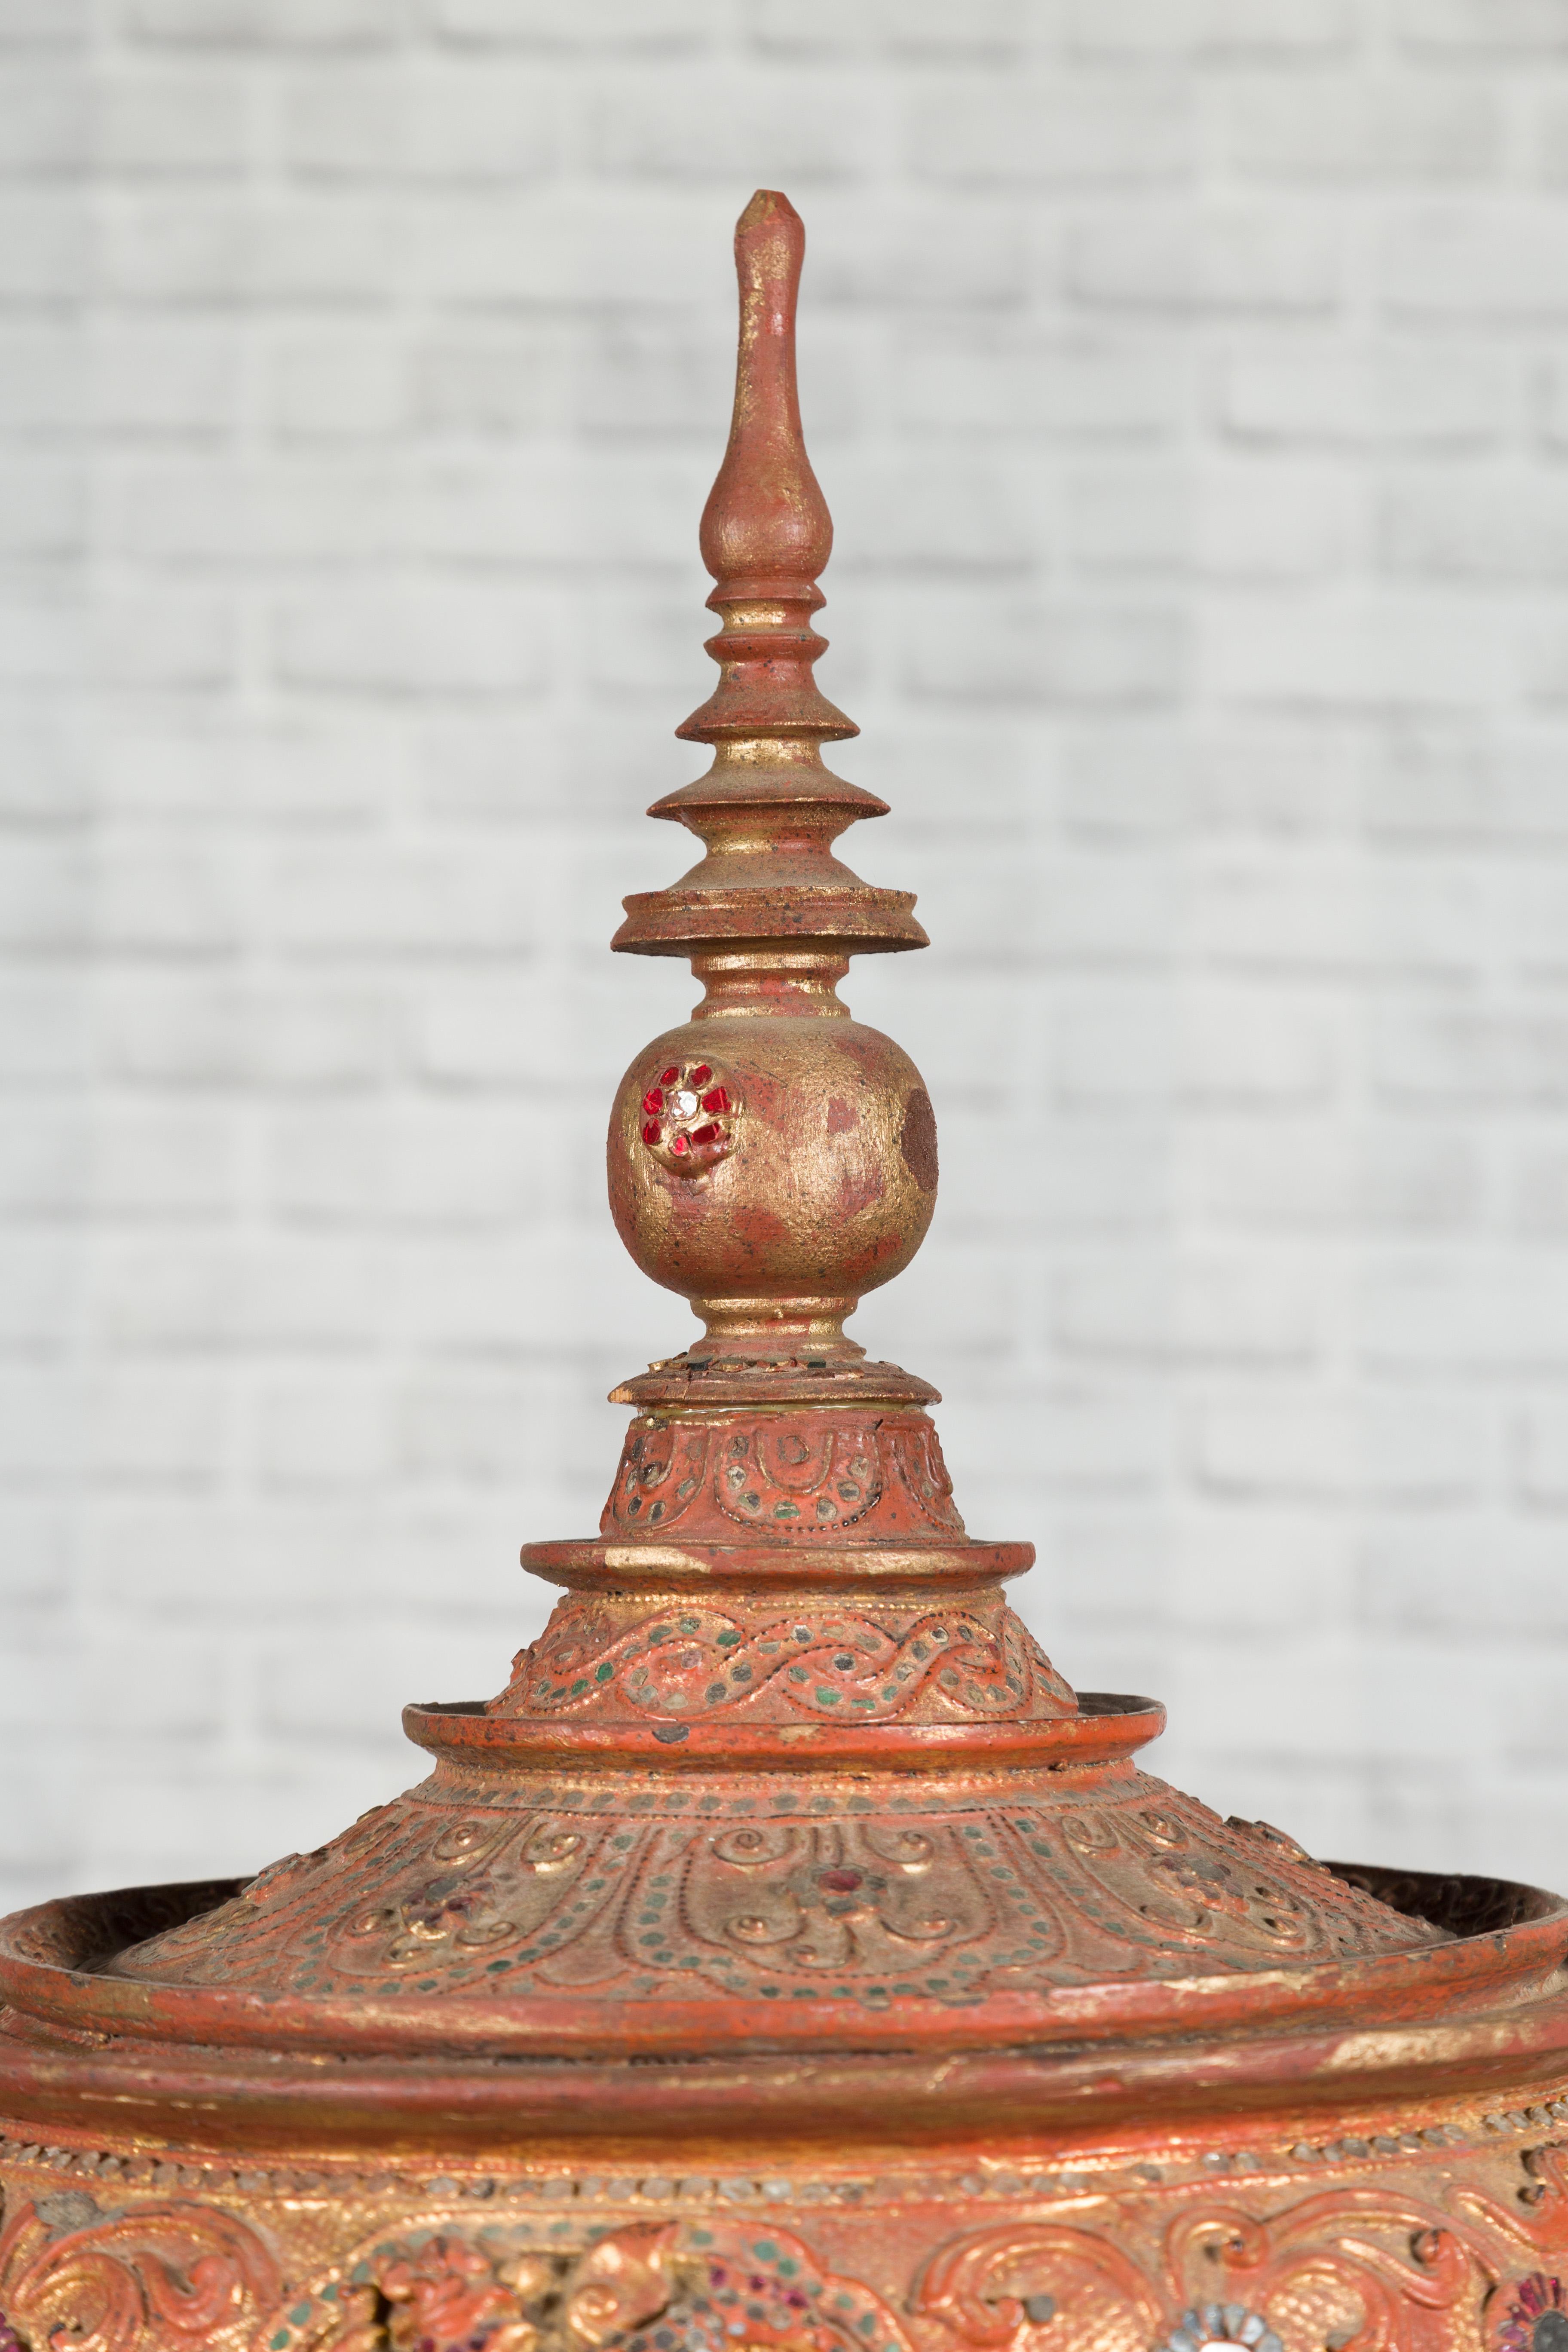 Antique Burmese Carved Teak Lidded Offering Bowl with Inlaid and Gilt Decor 12